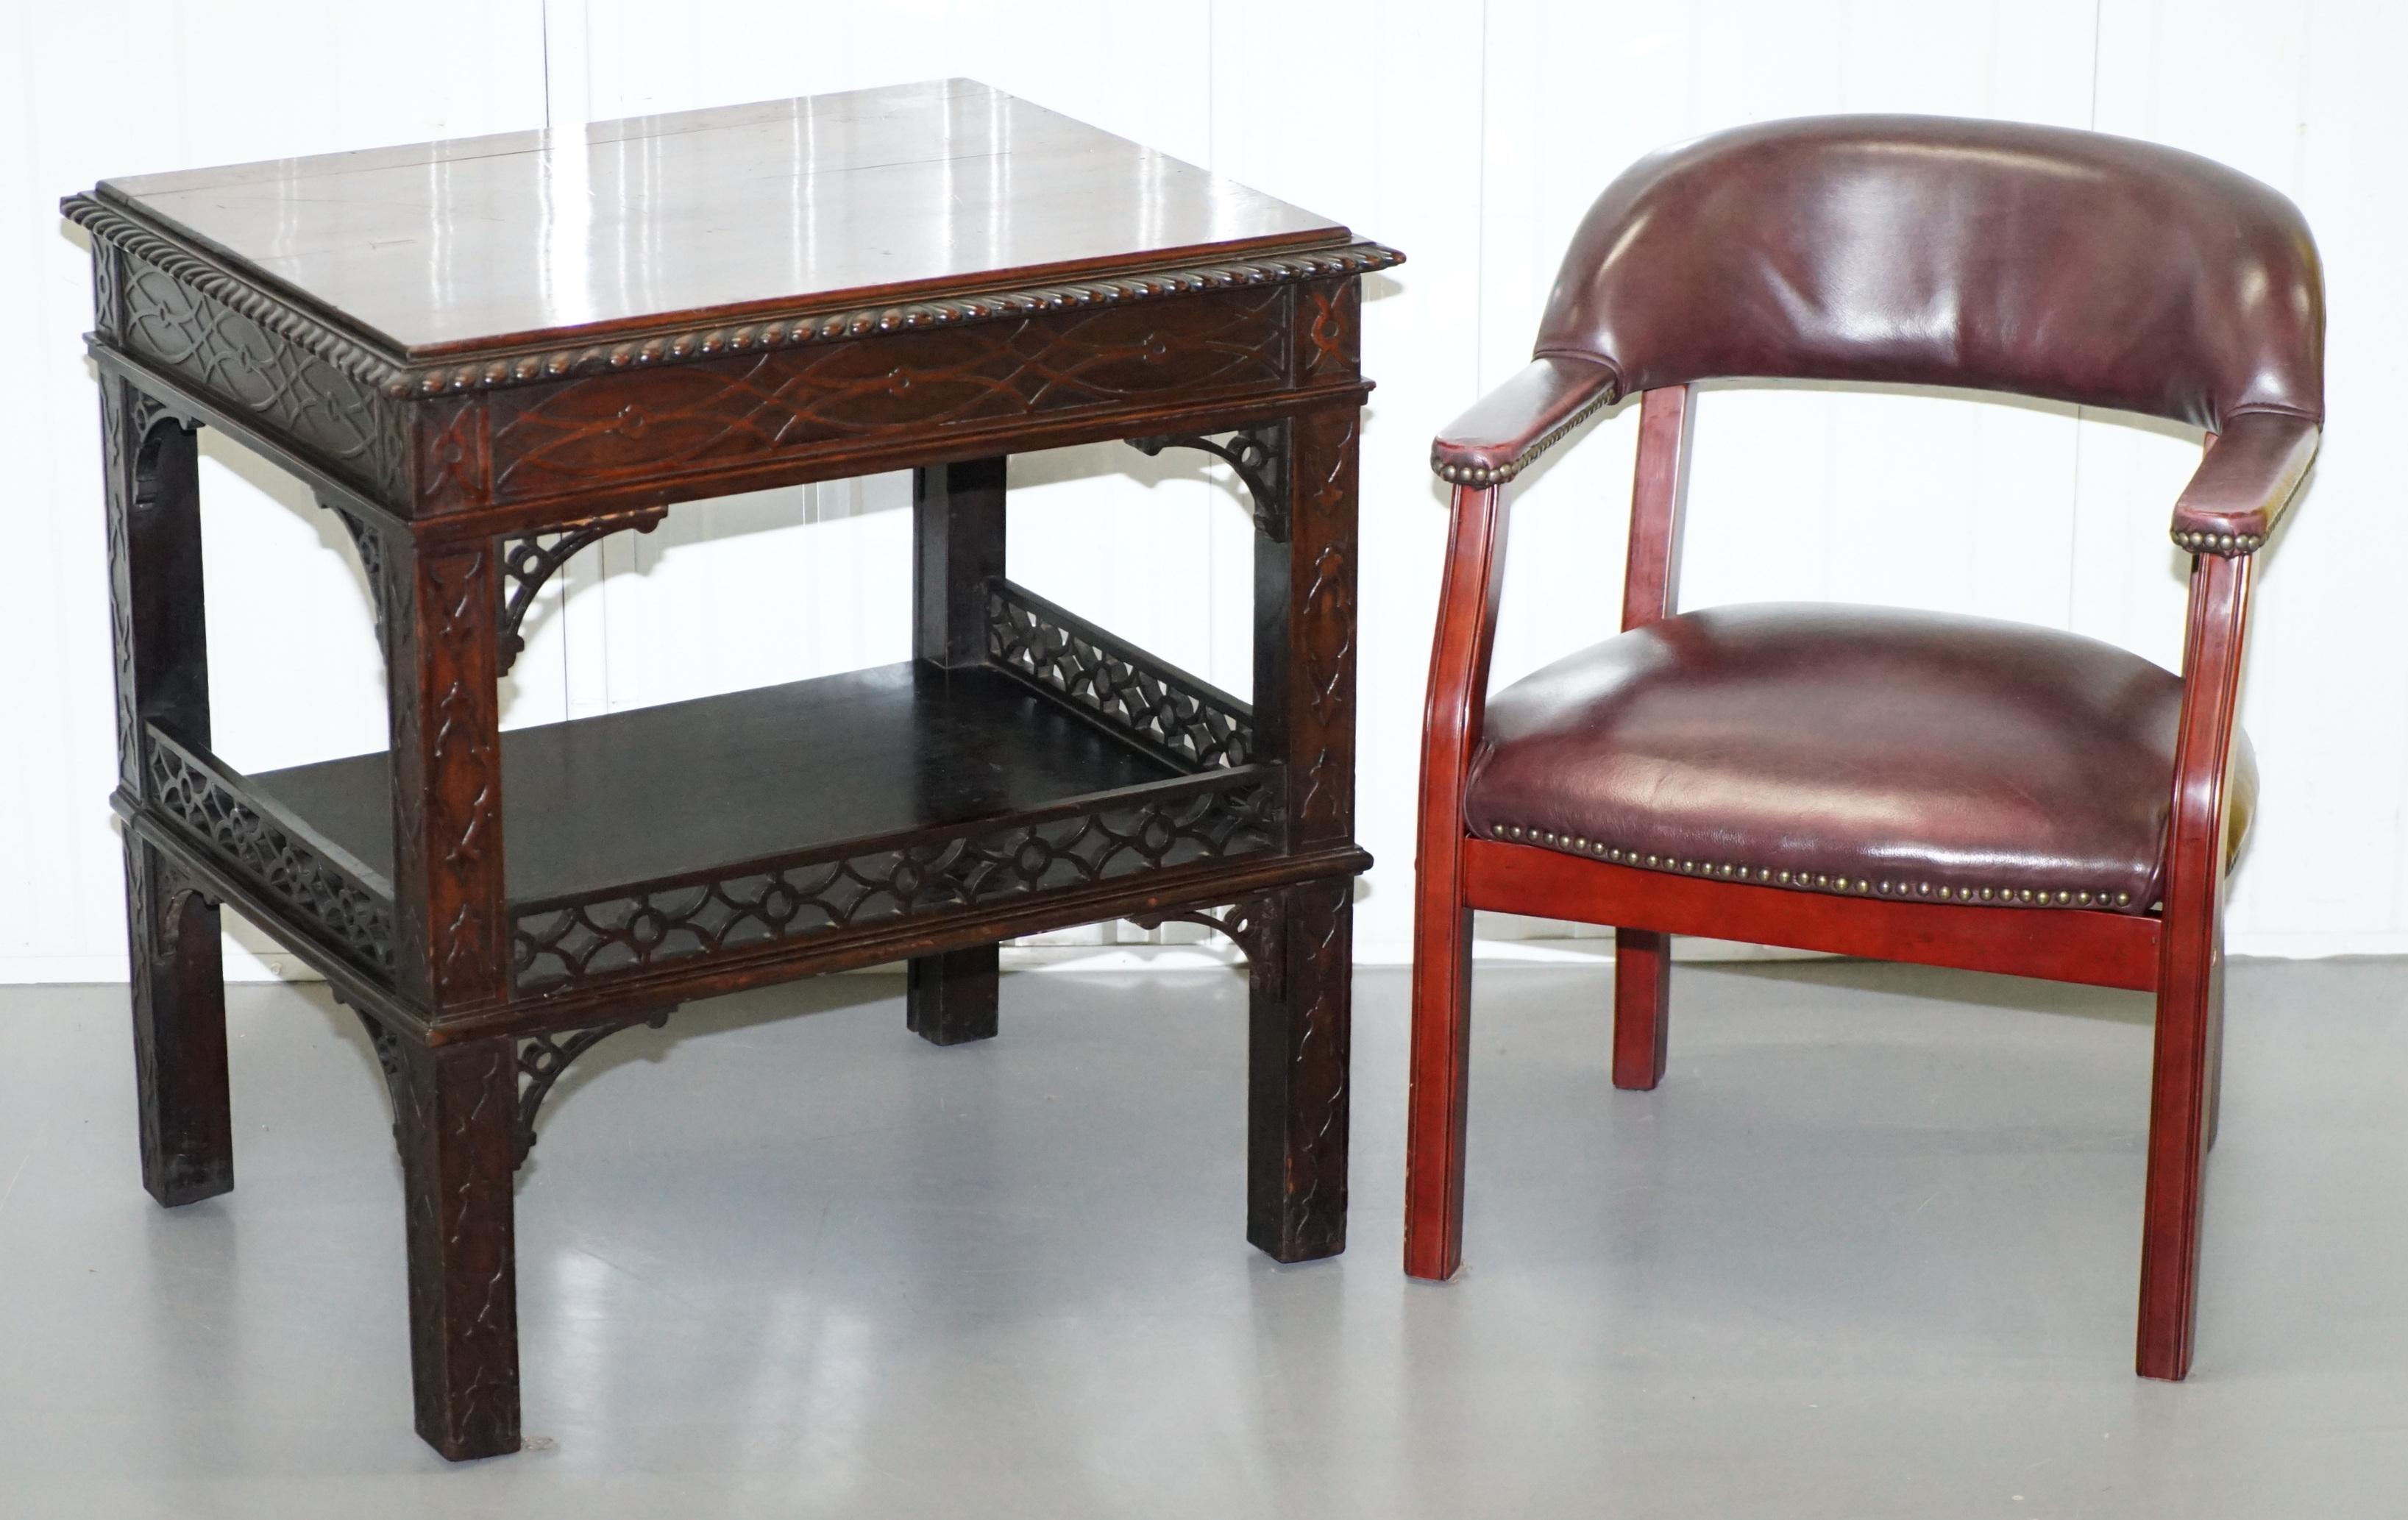 Wimbledon-Furniture

Wimbledon-Furniture is delighted to offer for sale this stunning circa 1850 Fret work carved occasional table after Thomas Chippendale

Please note the delivery fee listed is just a guide, it covers within the M25 only, for